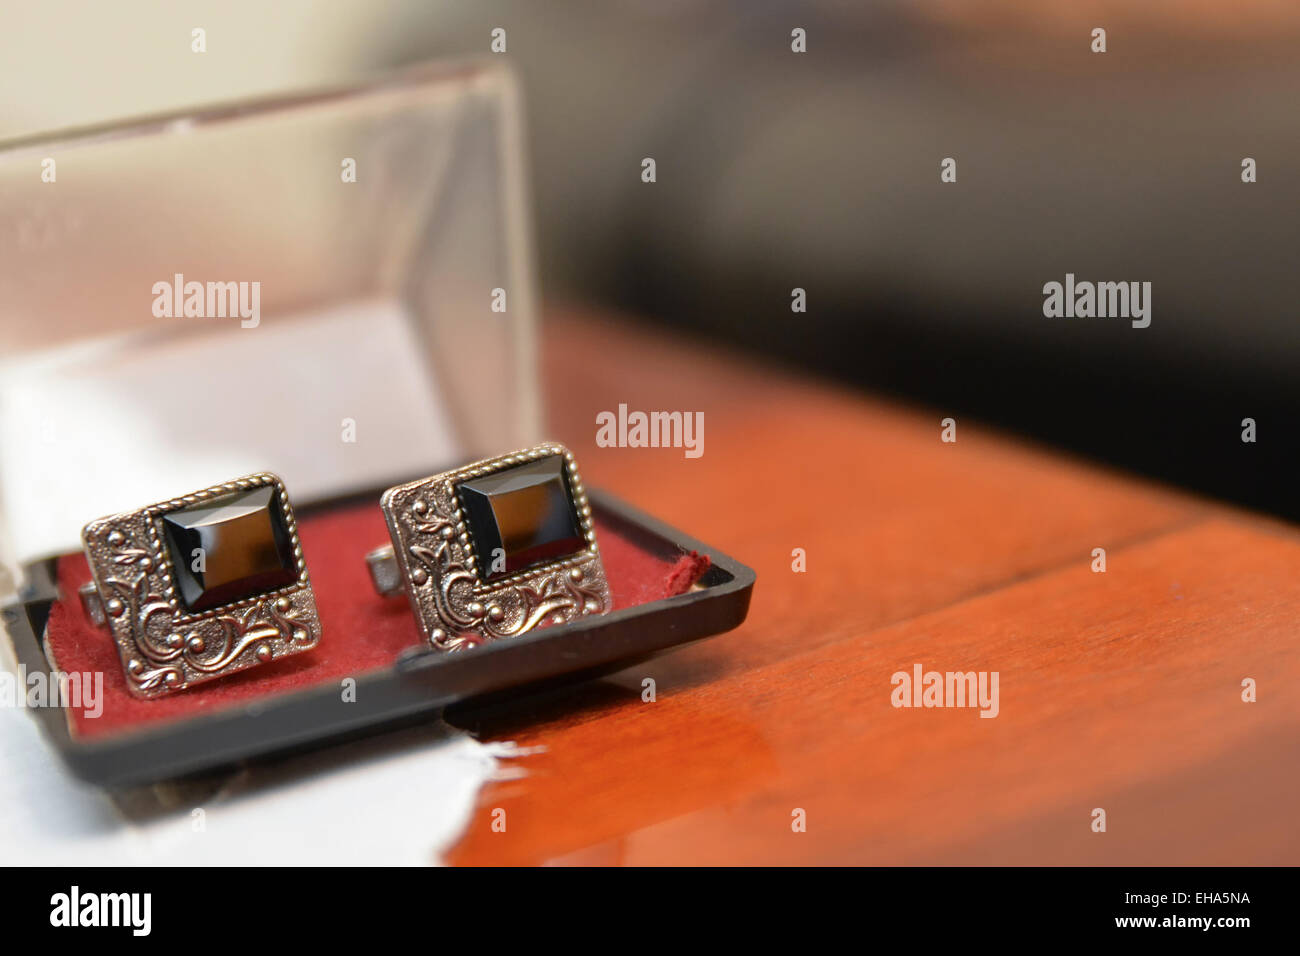 Silver Cufflinks placed in a plastic black box Stock Photo